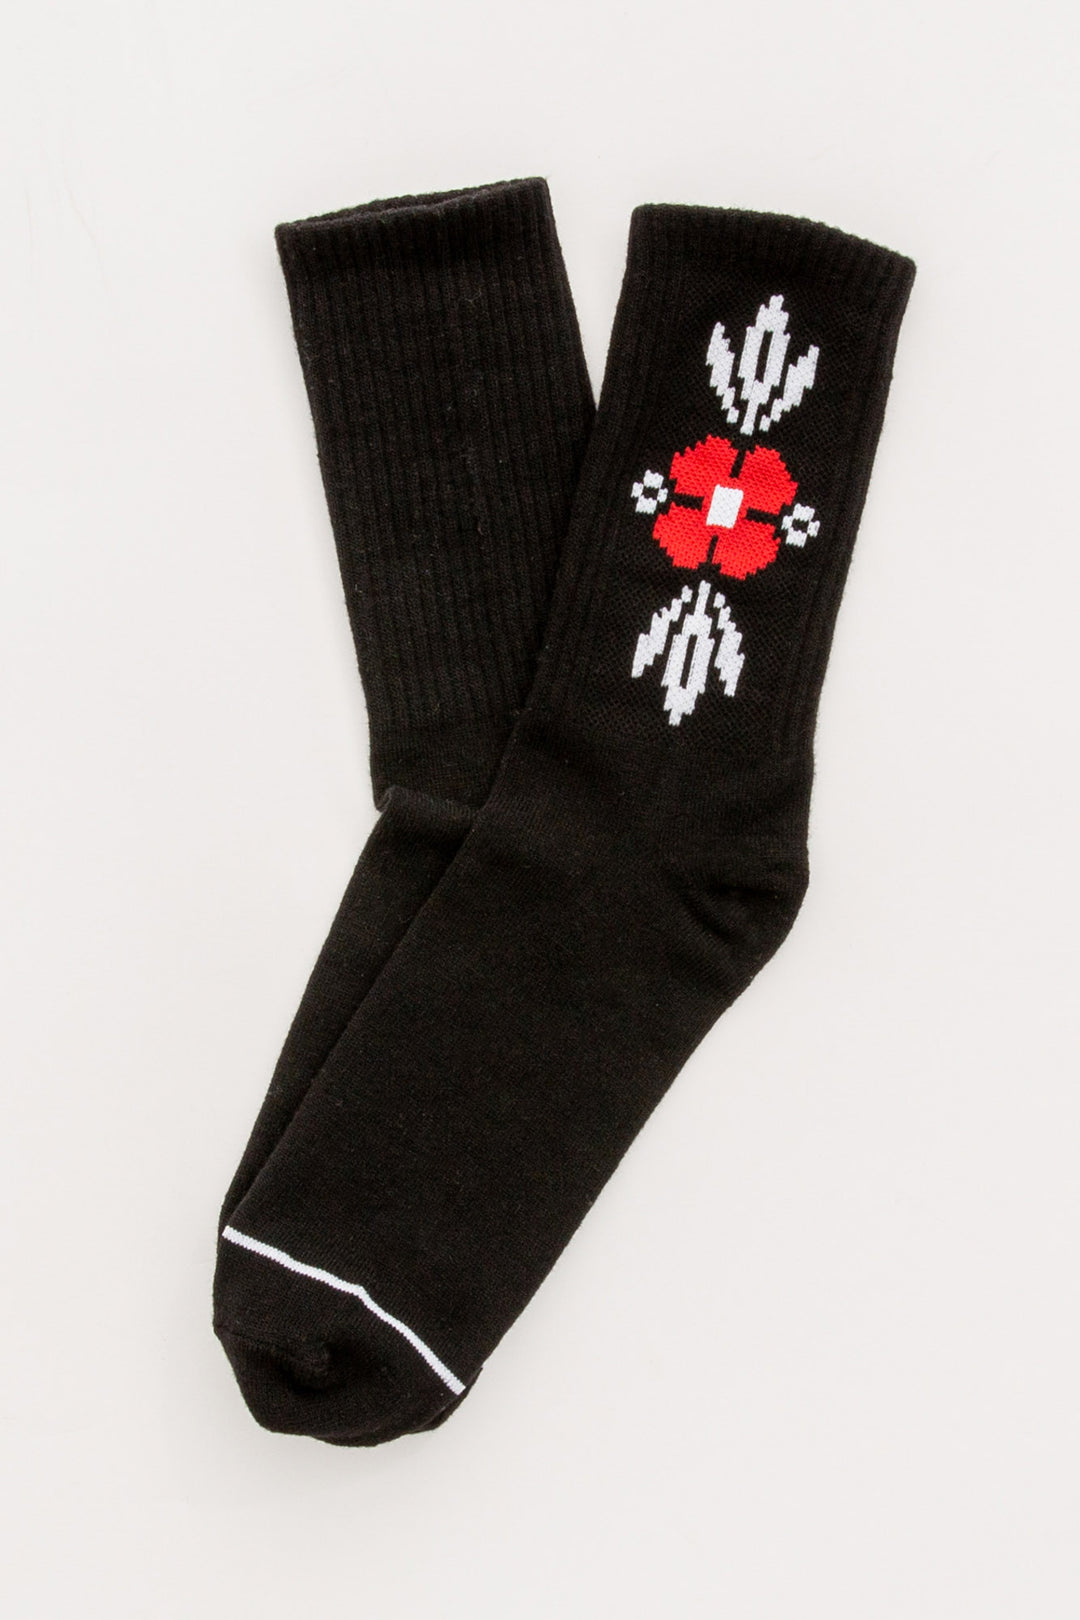 Black ribbed cozy socks with floral embroidery on sides. Gripper print on soles for non-skid. (7325666115684)